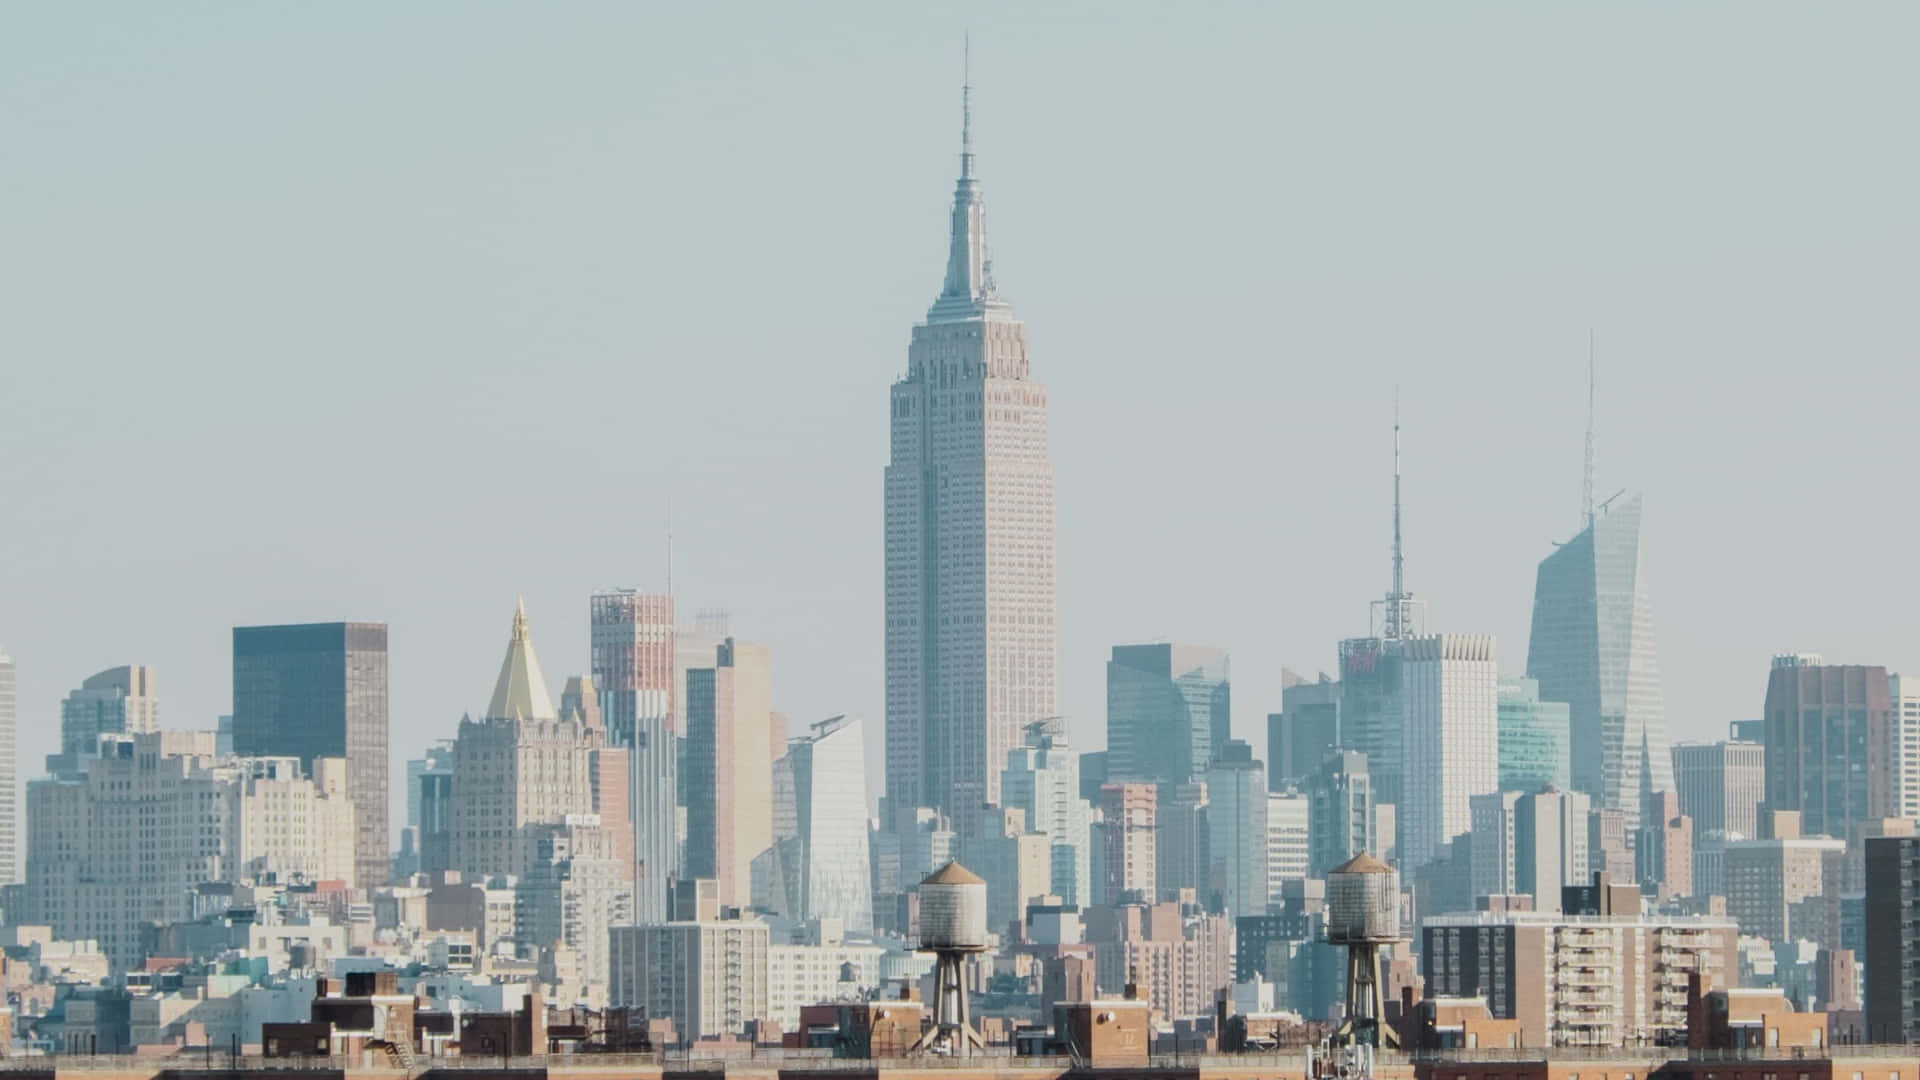 1440p Empire State Building Background 2560 X 1440 Background